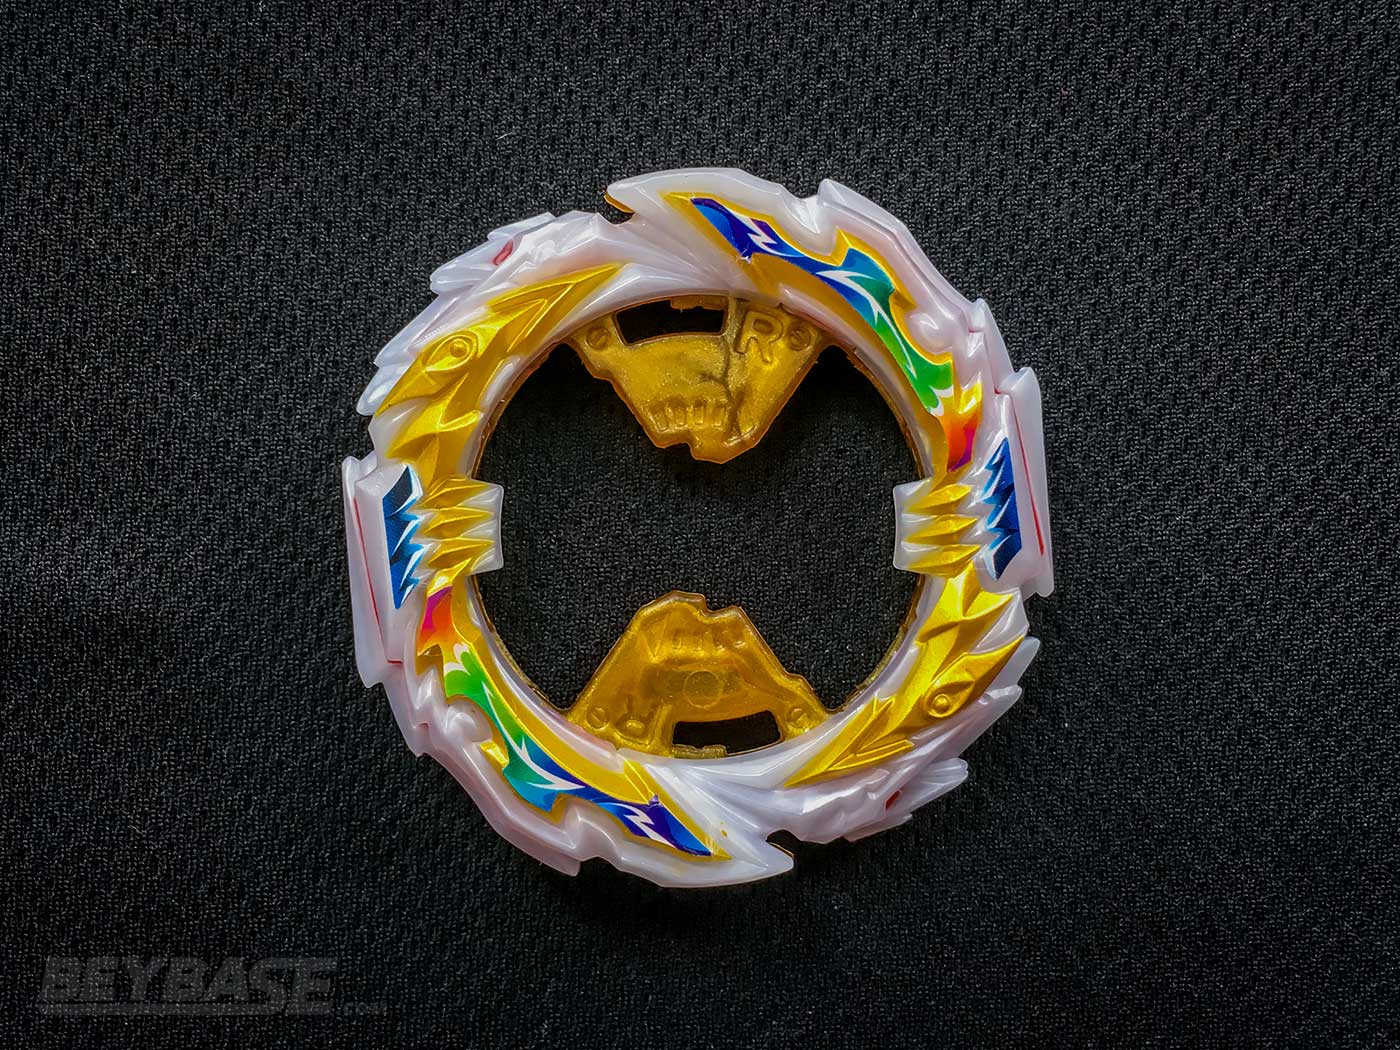 tempest ring beyblade part